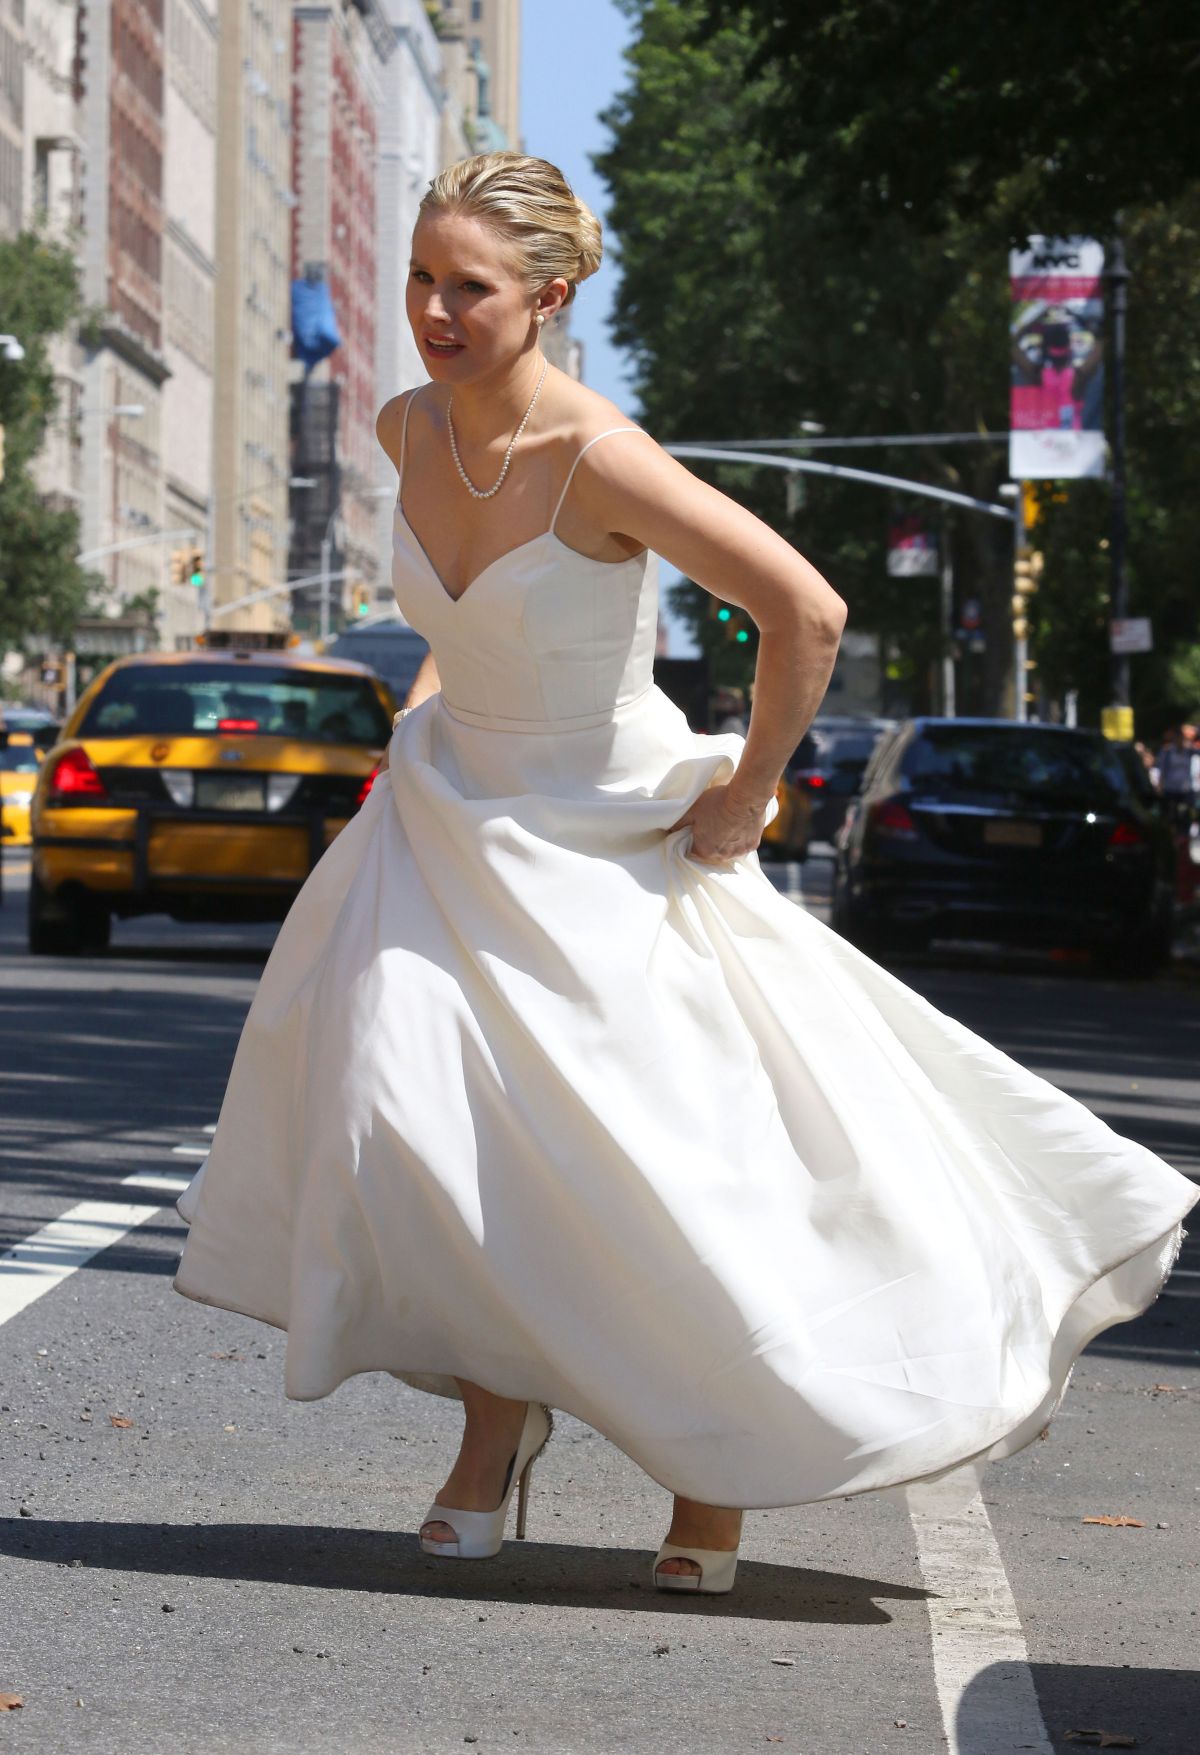 kristen-bell-as-a-runaway-bride-on-the-set-of-like-father-in-new-york-08-30-2017_1.jpg